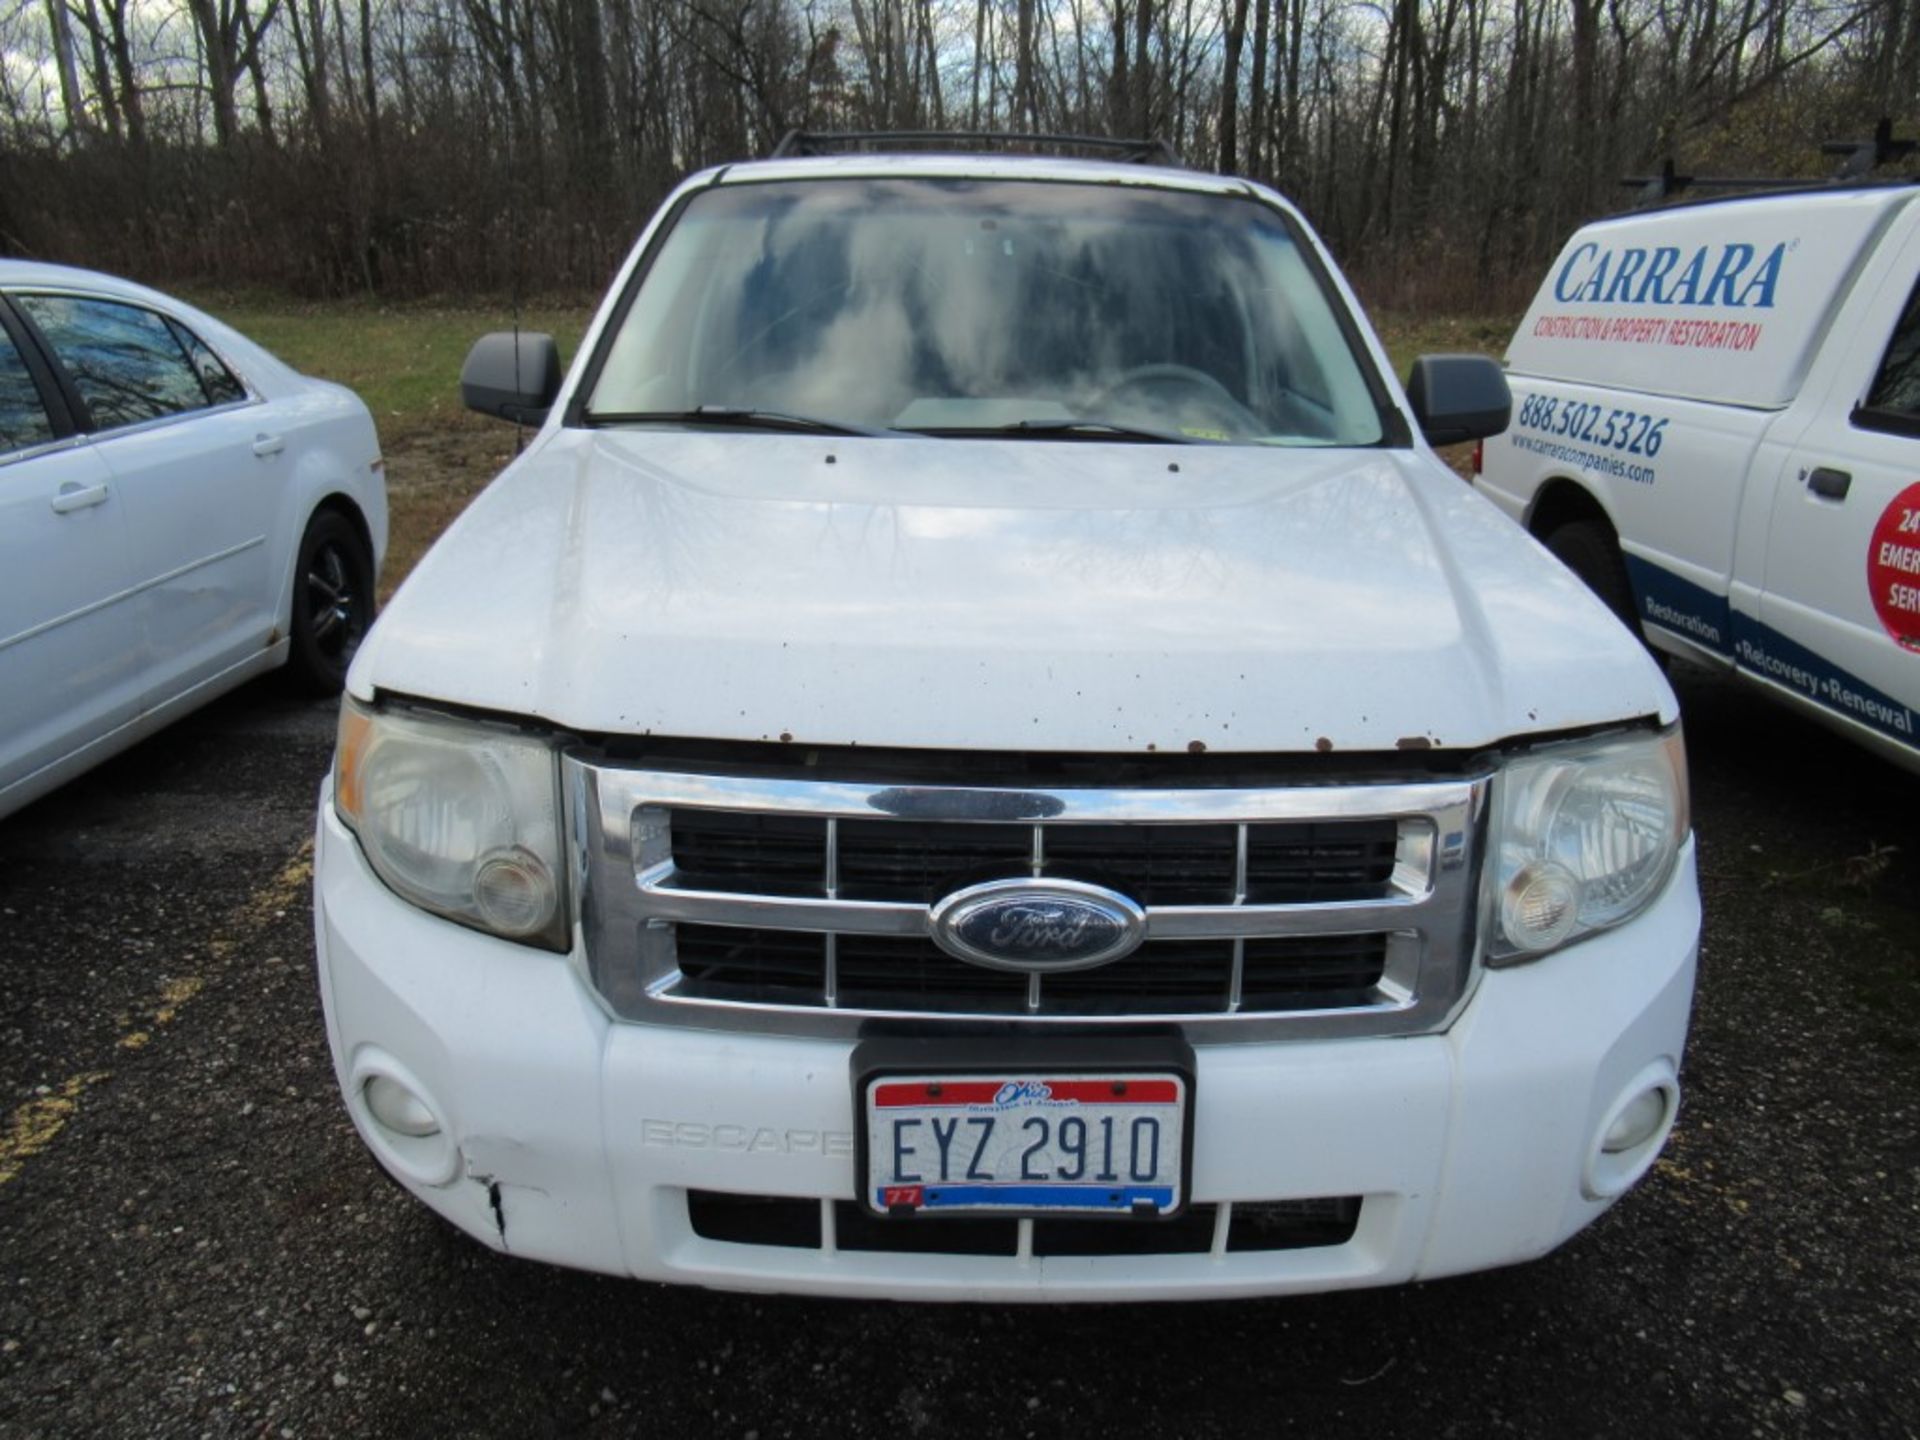 2008 Ford Escape XLT SUV , VIN 1FMCU02118KD90320, Automatic, Cruise Control, AC, PW, PL, PS, AM/FM/ - Image 3 of 31